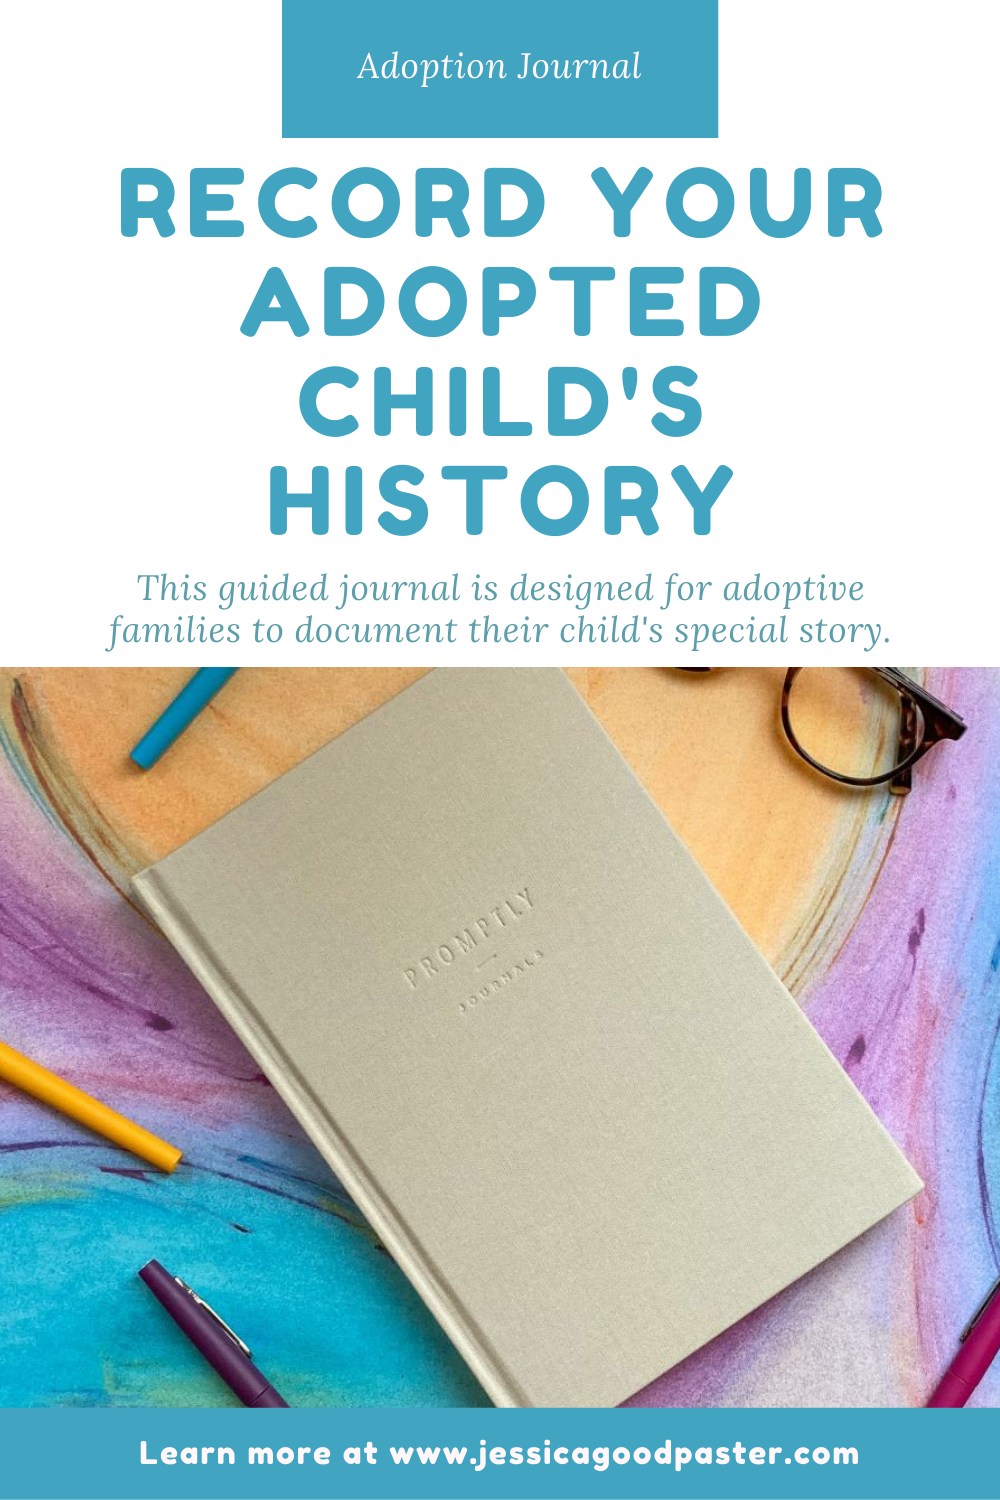 Adoption History Journal | Journal prompts make documenting, connecting, and healing so much easier. Promptly Journals provide journaling ideas with beautiful childhood, adoption, relationship, autobiography, travel, and missionary journals…and more! Their two-person journals foster inspiration and connection. Check out my review today! #journaling #journals #journalprompts #journalideas #journalinspiration